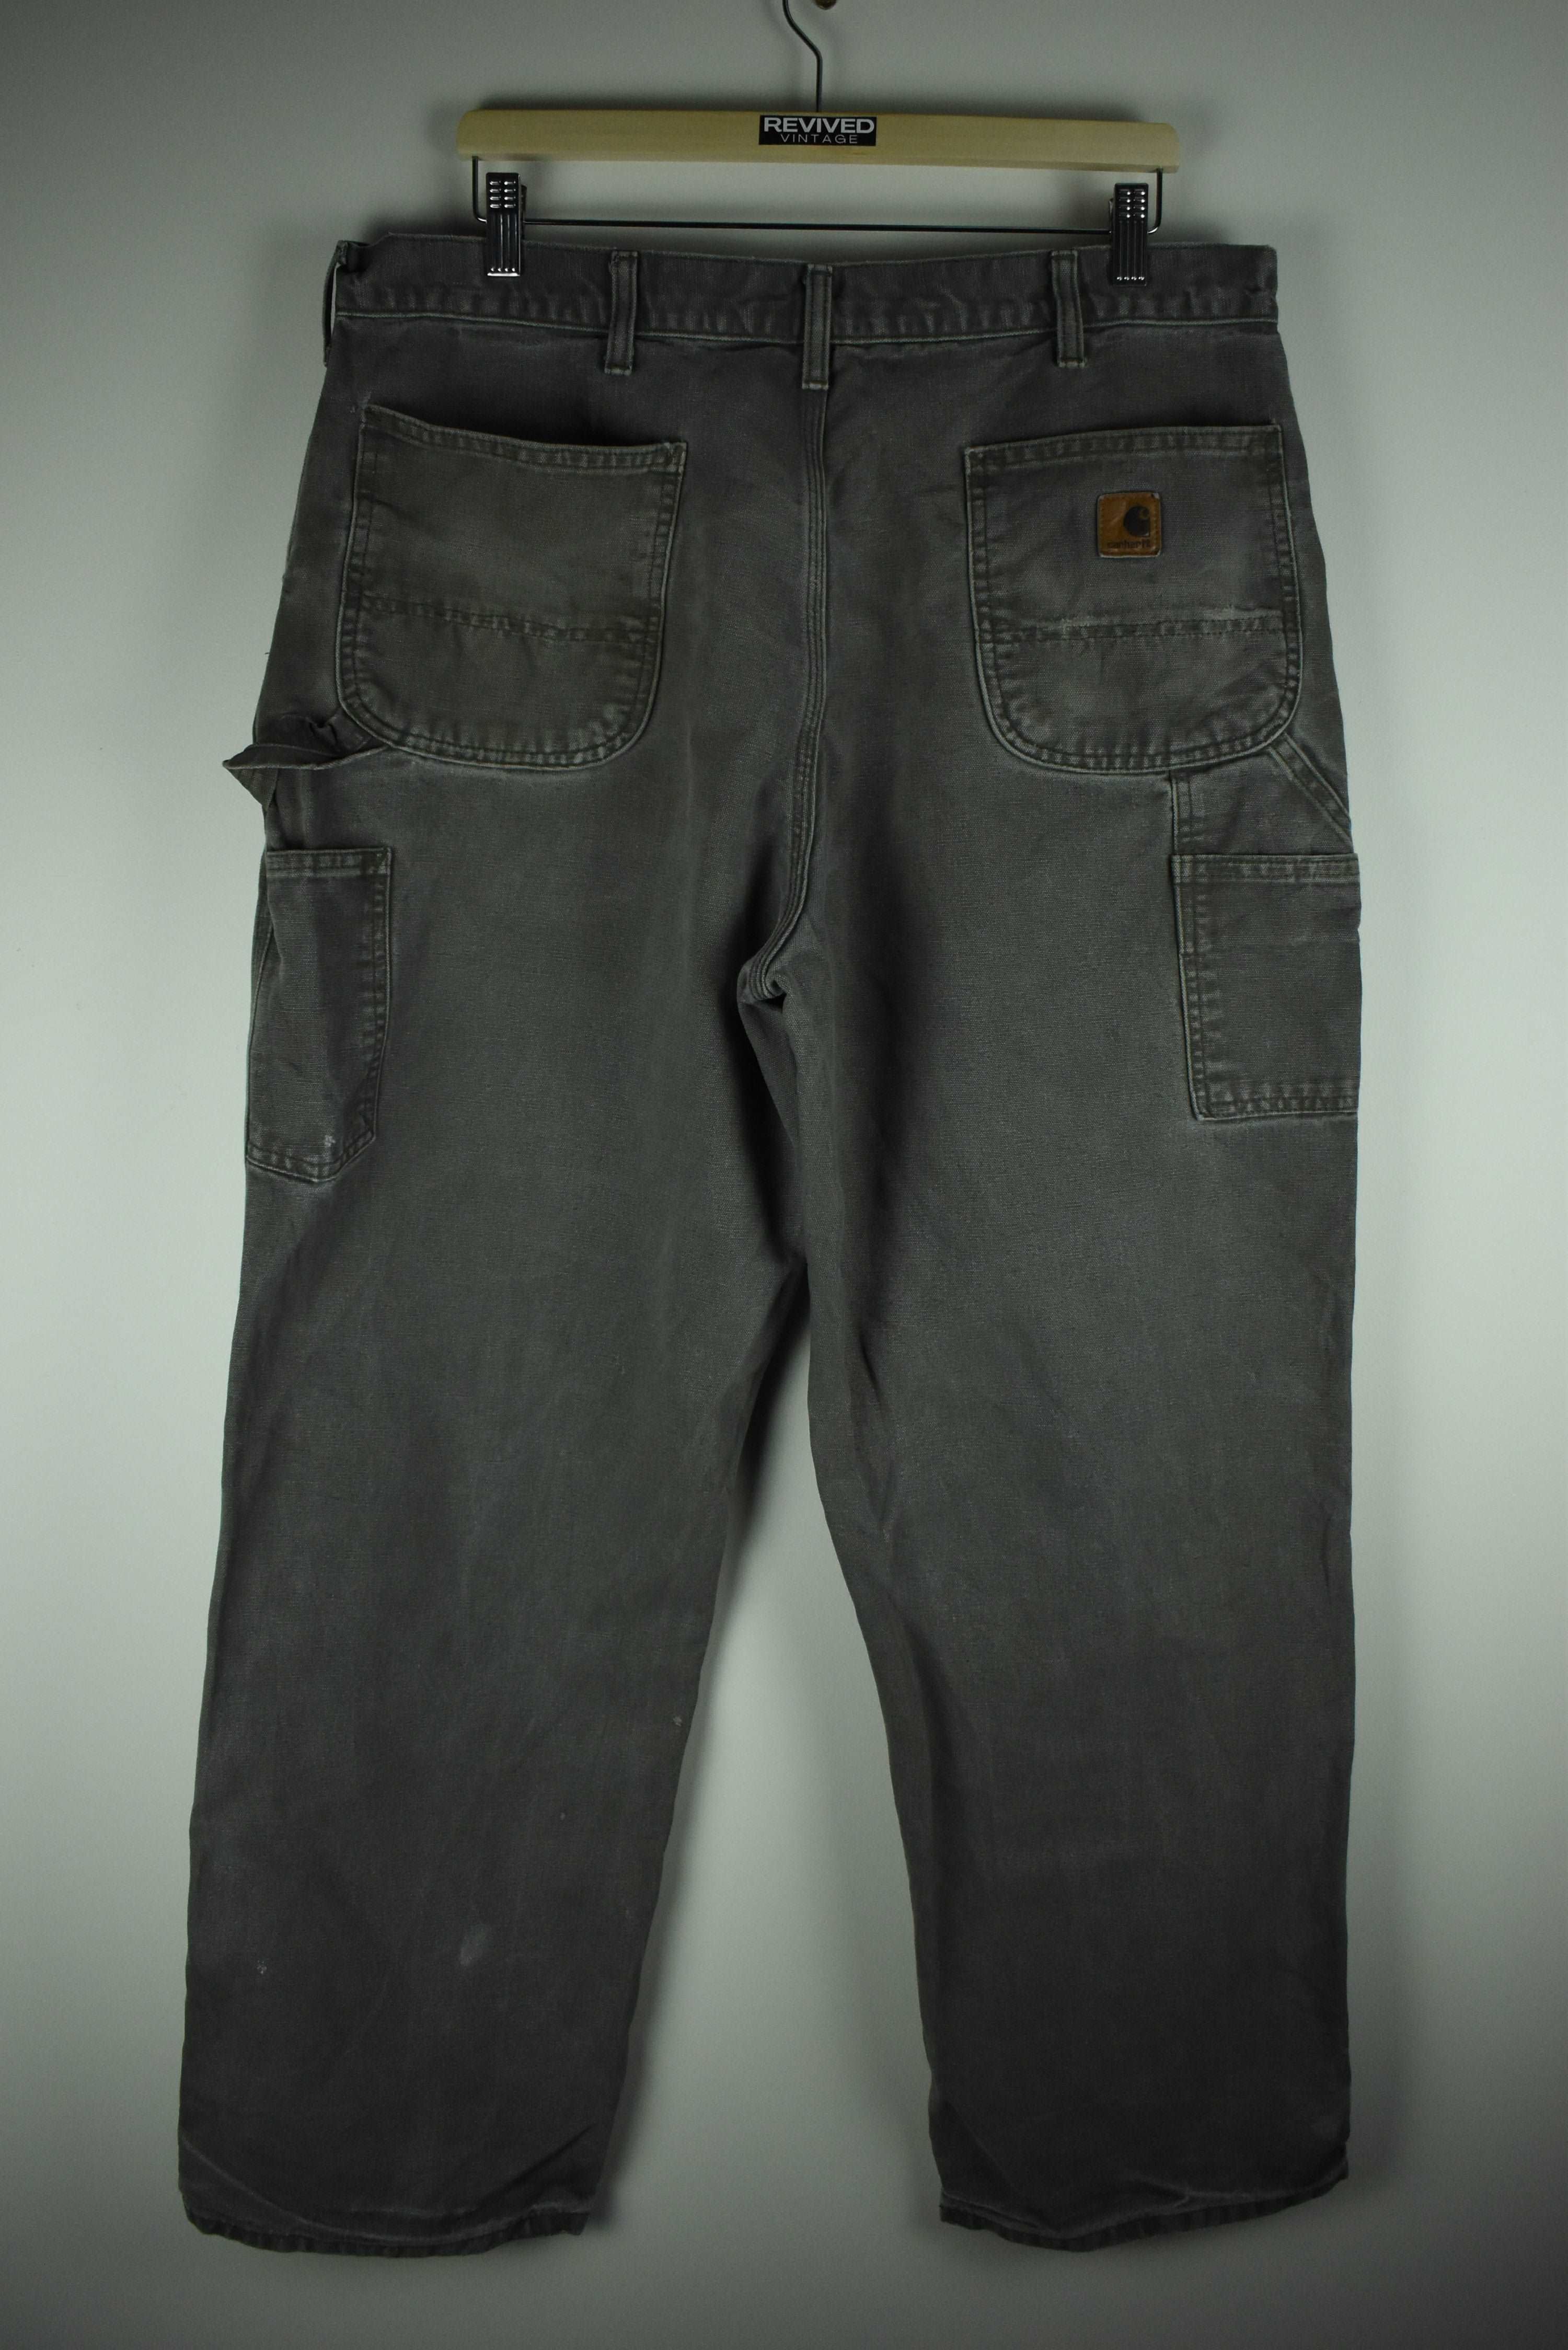 Vintage Carhartt Classic Workpants Relaxed Fit 38 x 32